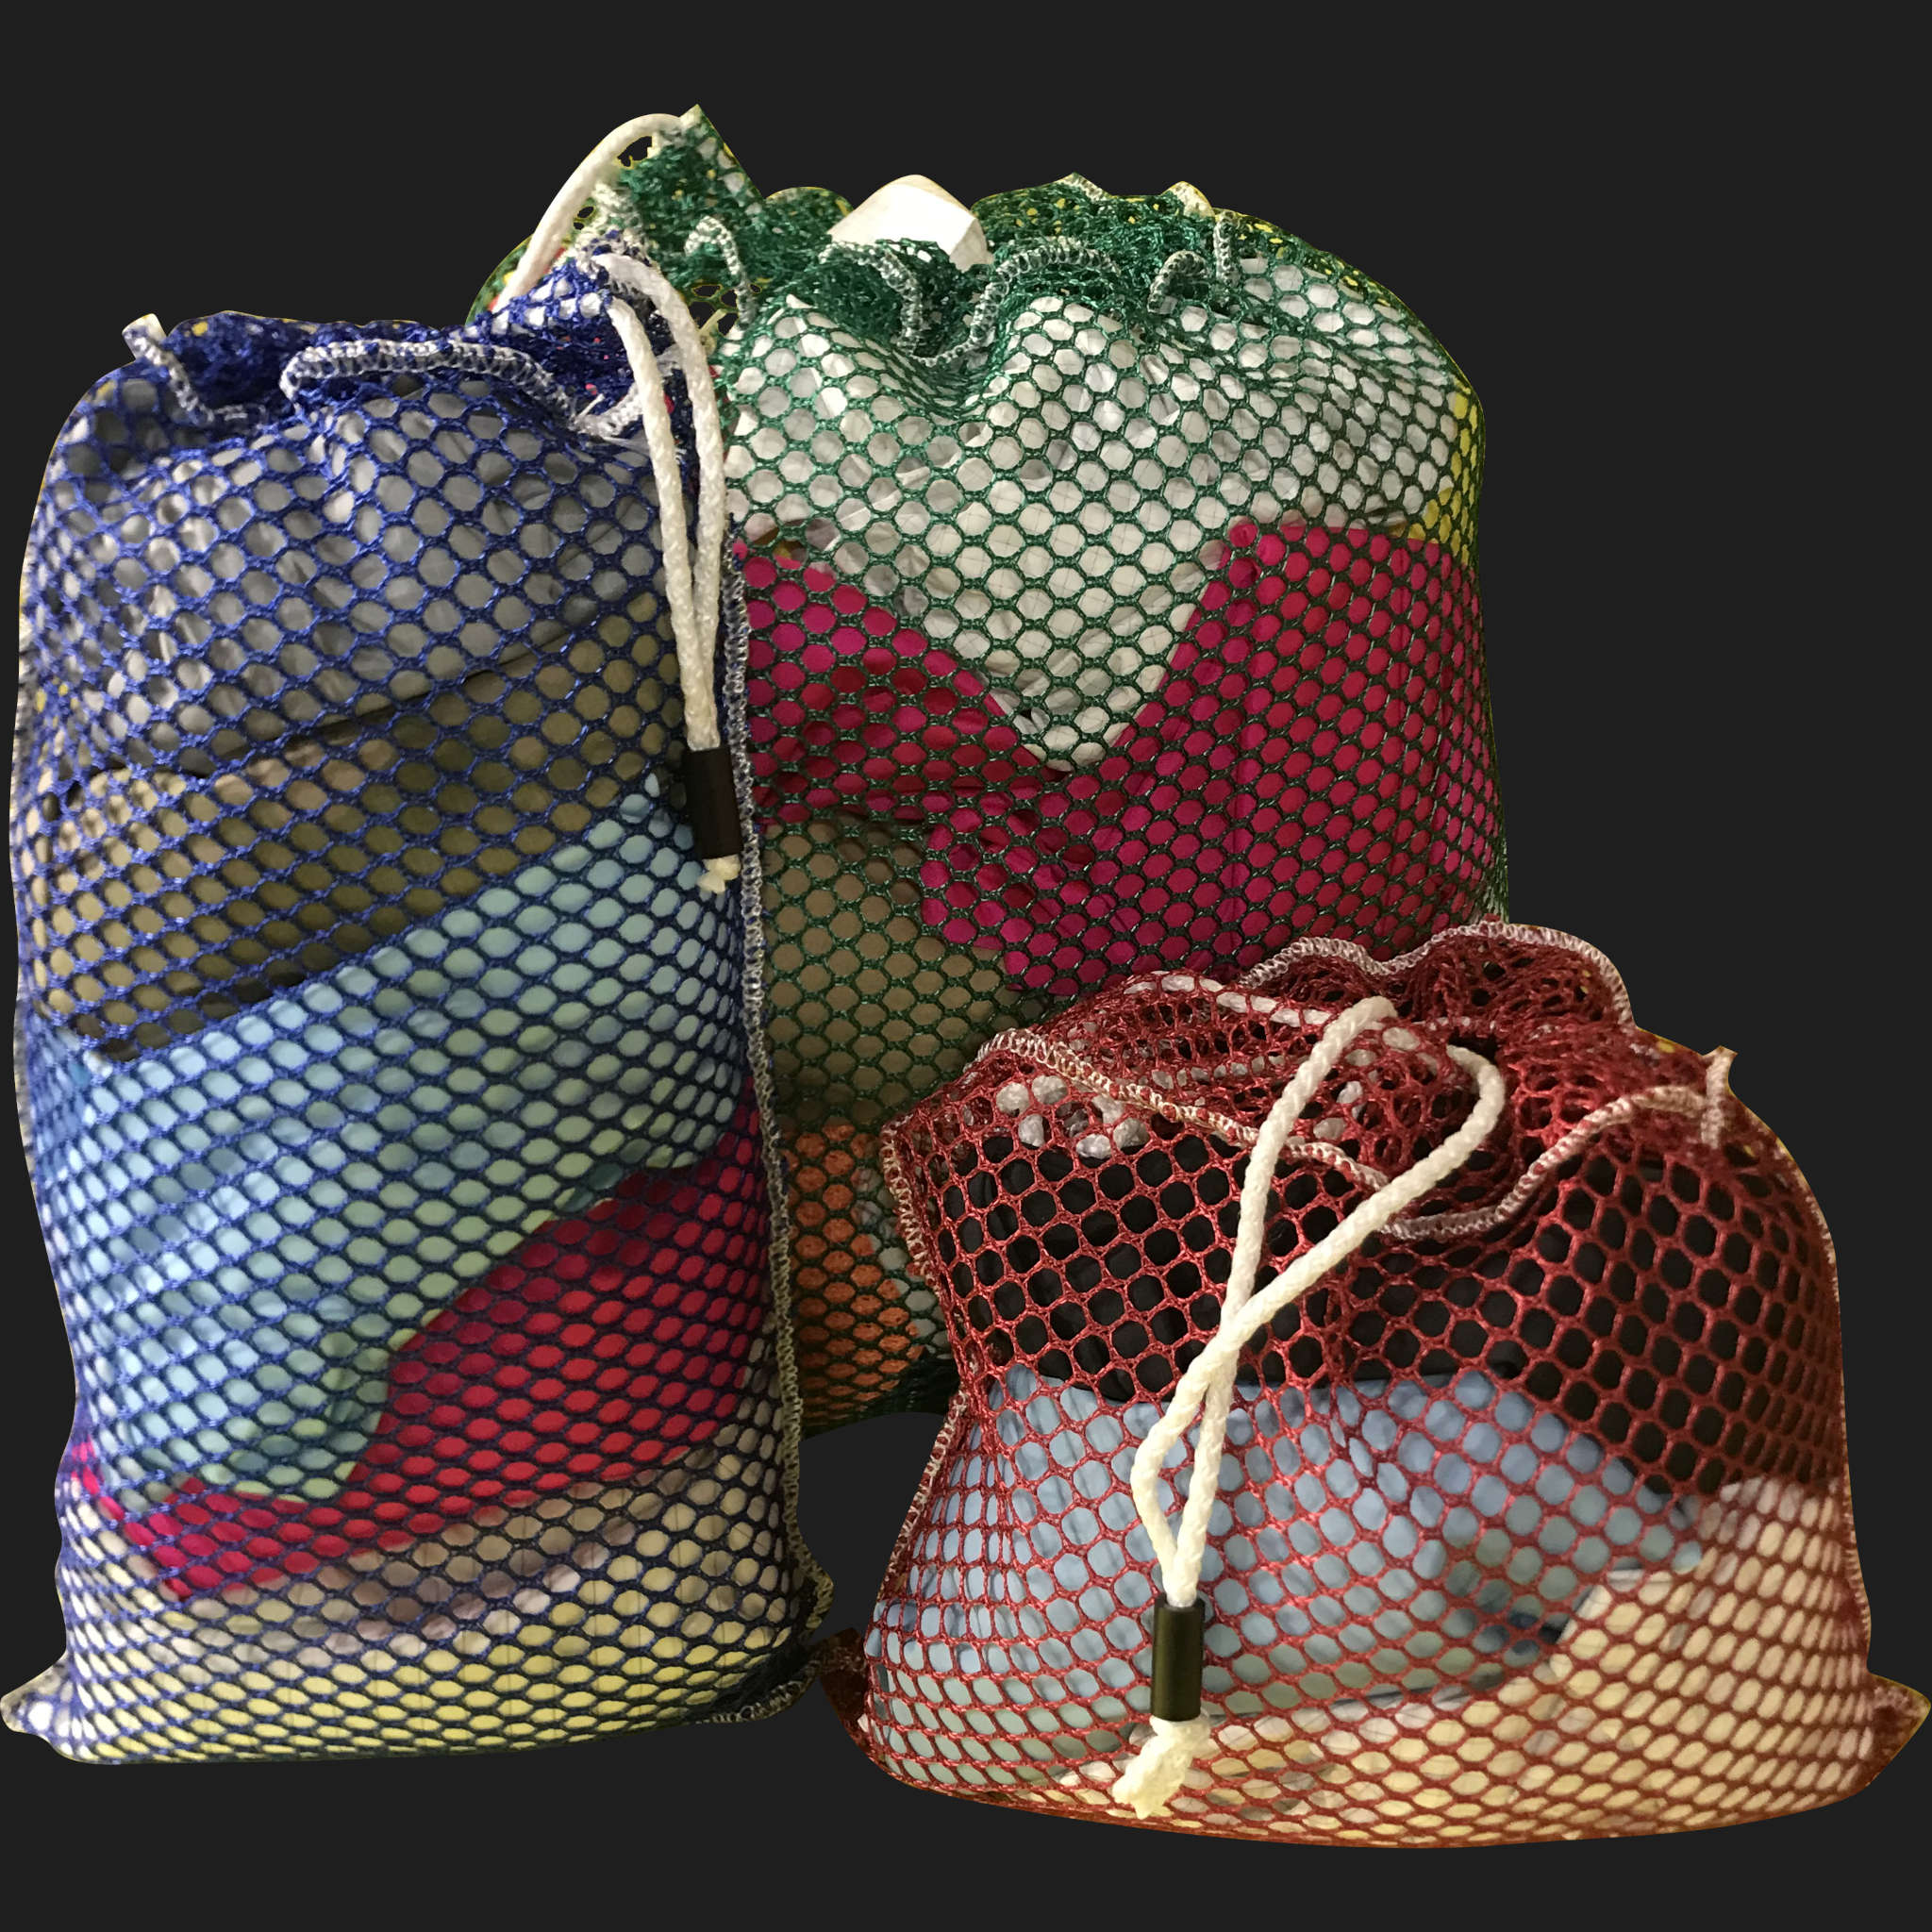 54" x 60" Customized Mesh-Net-Laundry Bags Heavy Duty with Cord and barrellock closure